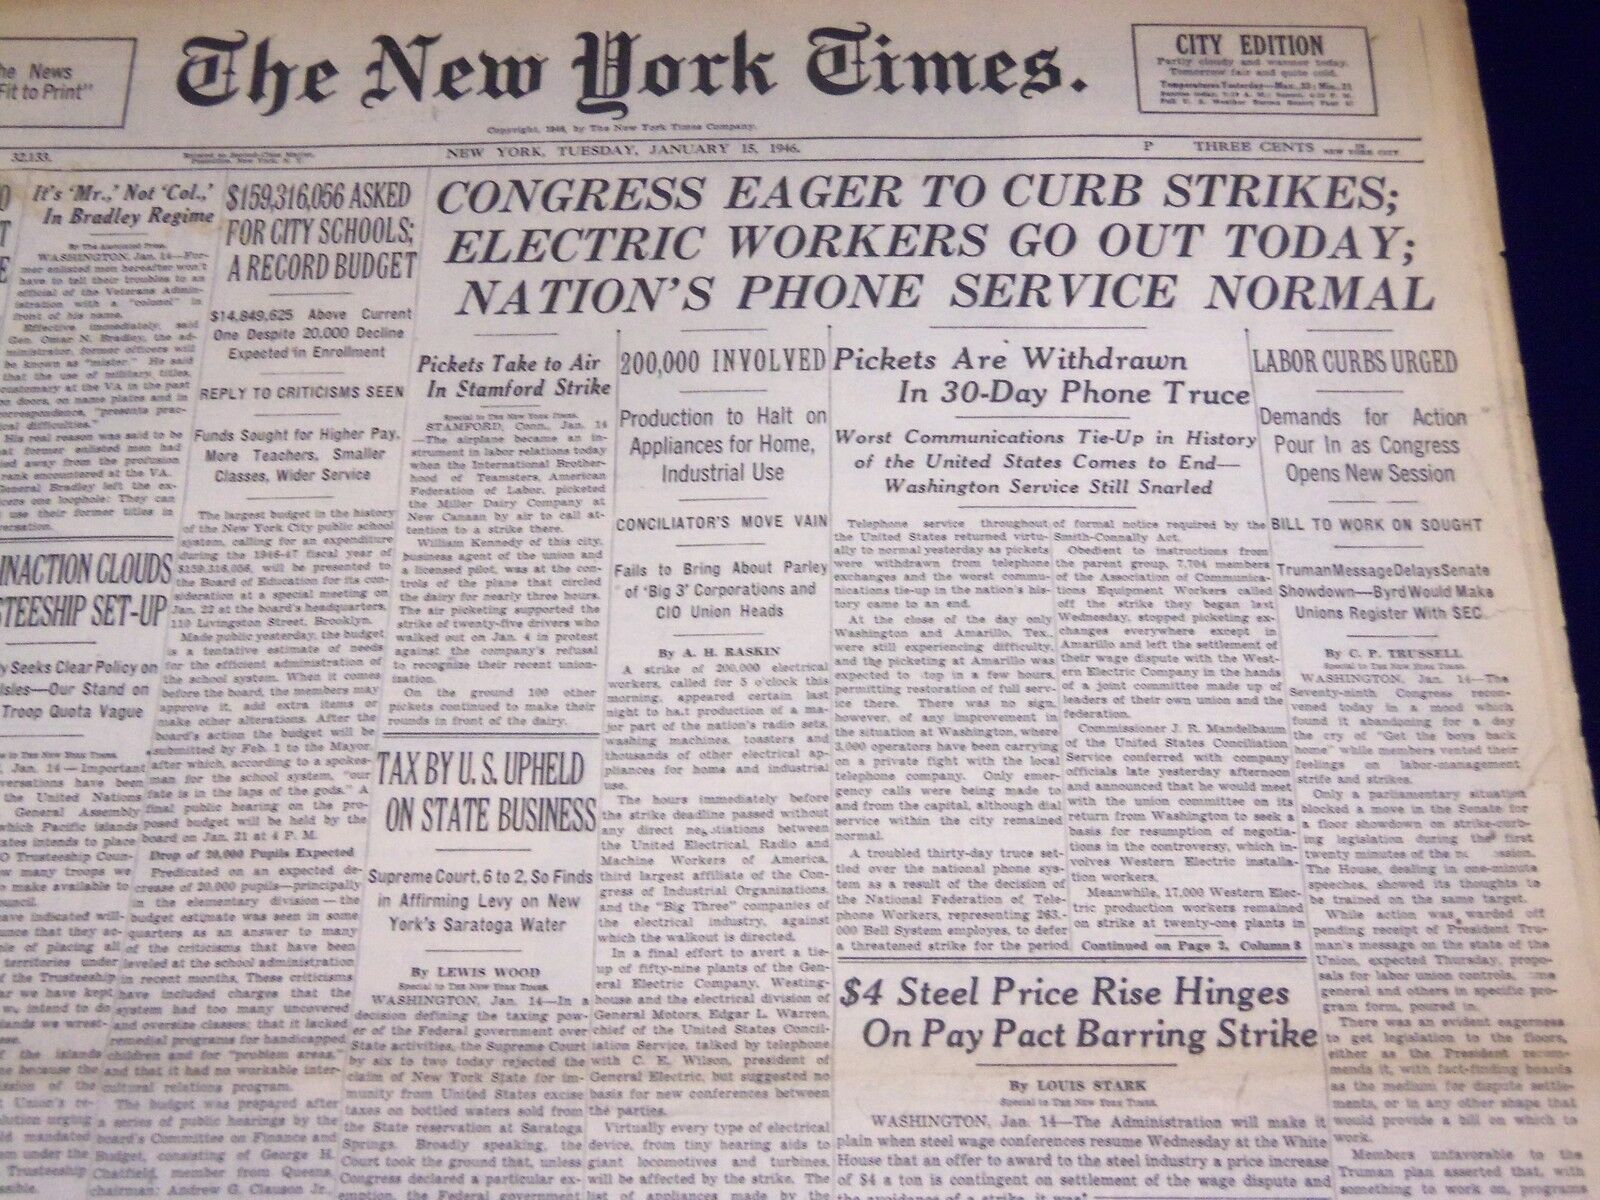 1946 JAN 15 NEW YORK TIMES - ELECTRIC WORKERS OUT TODAY, PHONES NORMAL - NT 2336